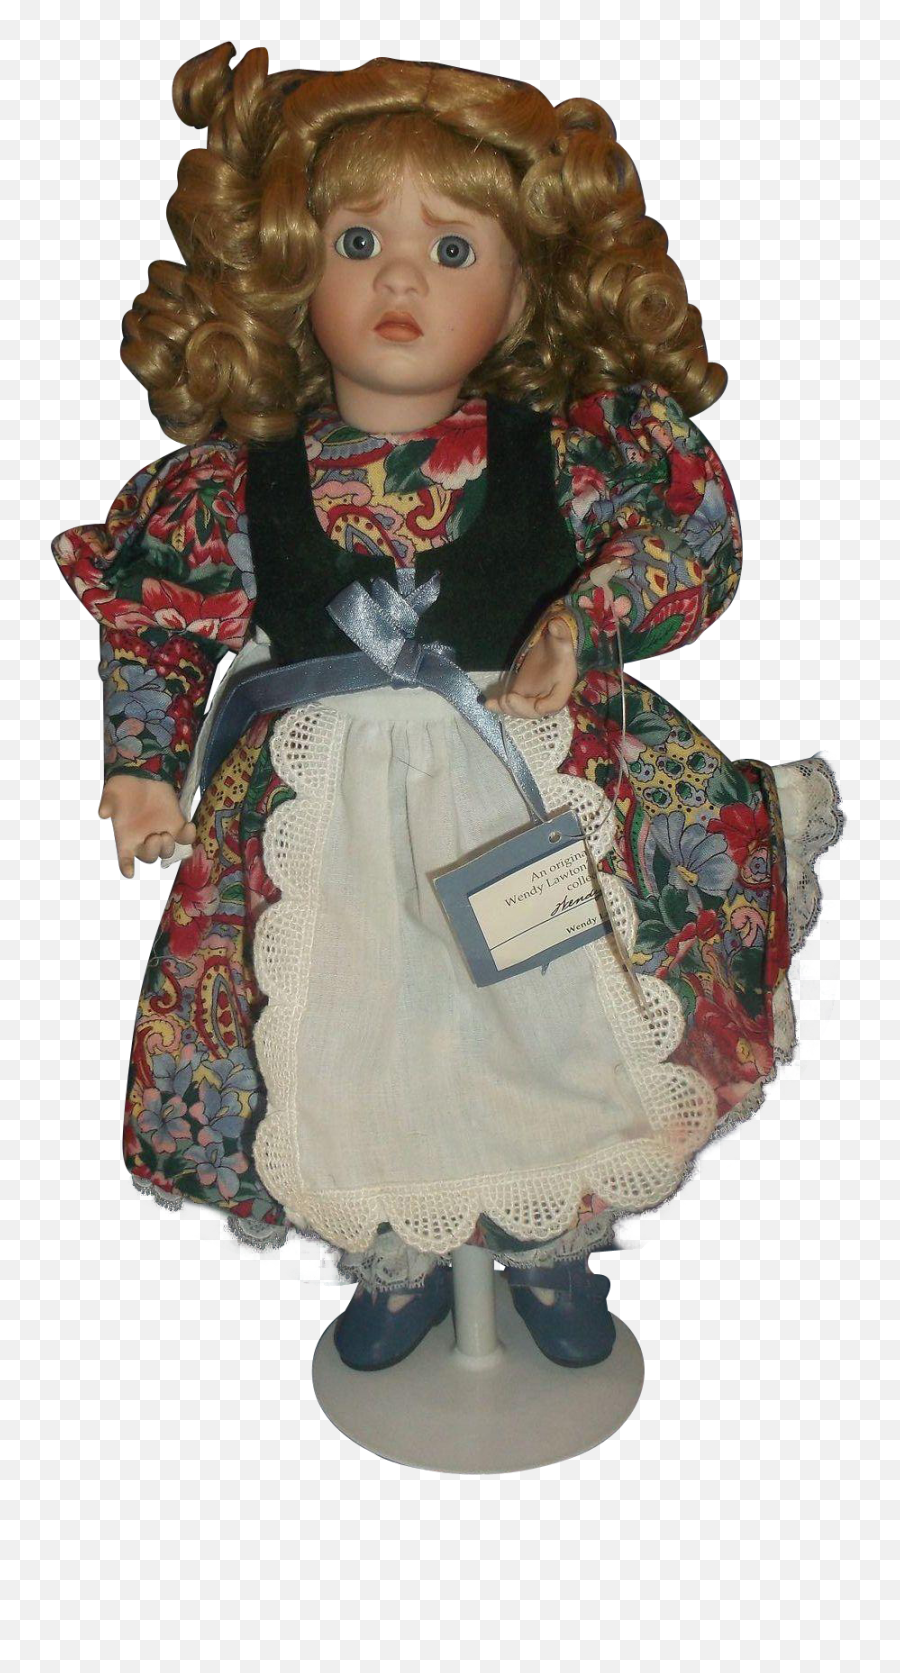 Mary Quite Contrary Porcelain Doll - Porcelain Doll Transparent Background Png,Doll Png